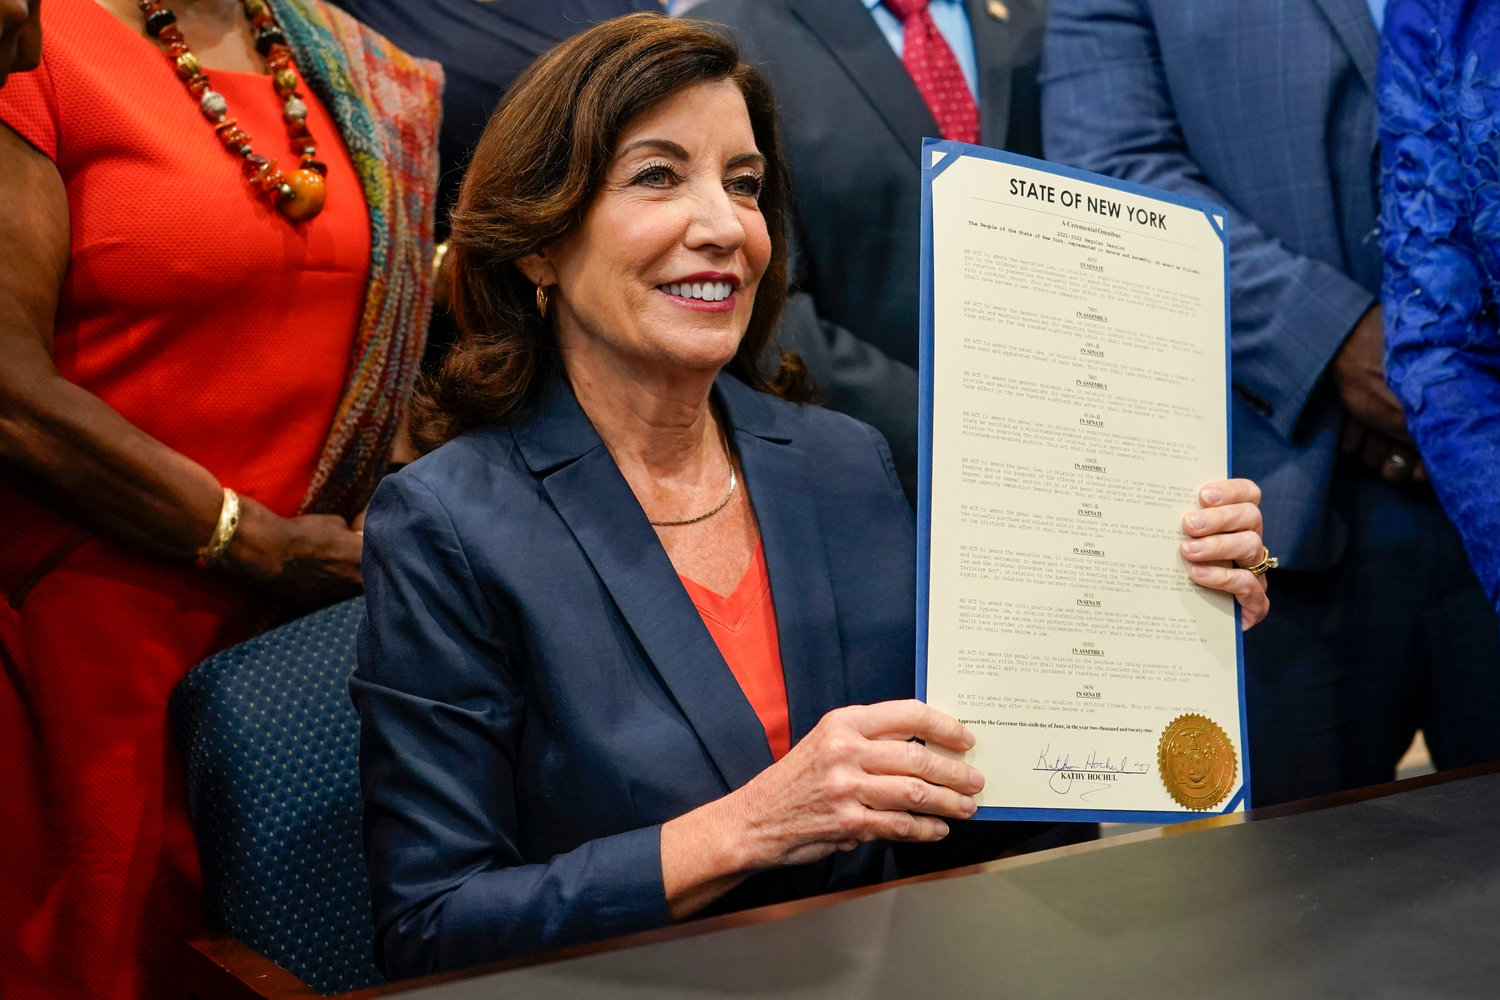 New York Gov. Kathy Hochul poses for photographers after signing a package of bills to strengthen gun laws, Monday, June 6, 2022, in New York.